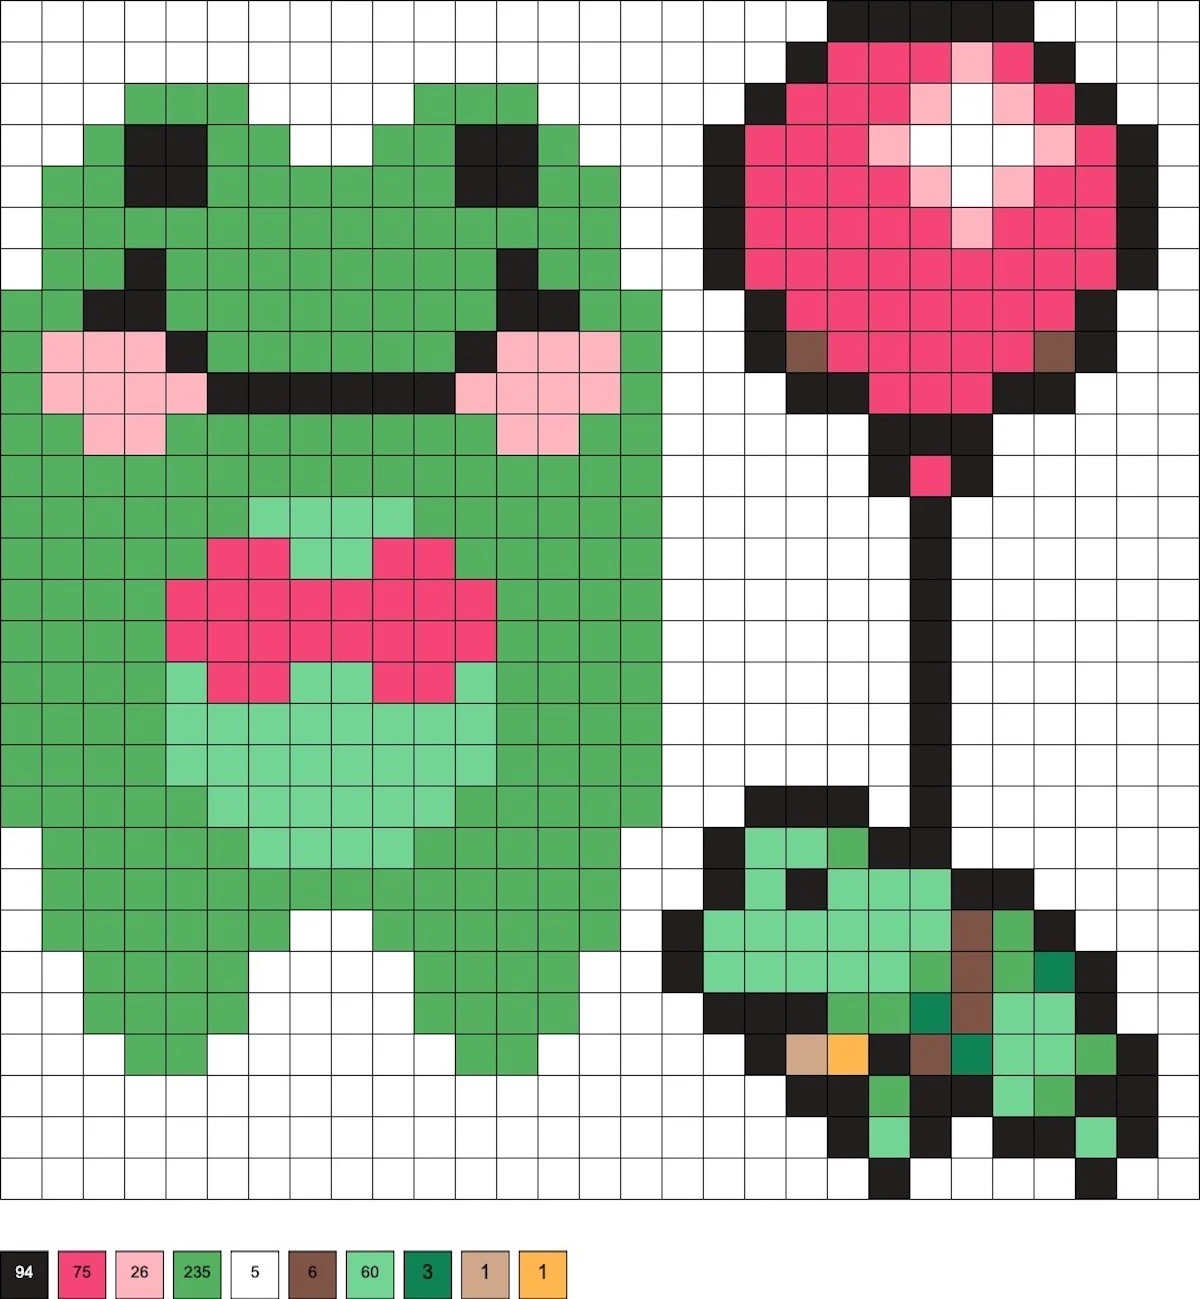 bow tie frog and balloon frog